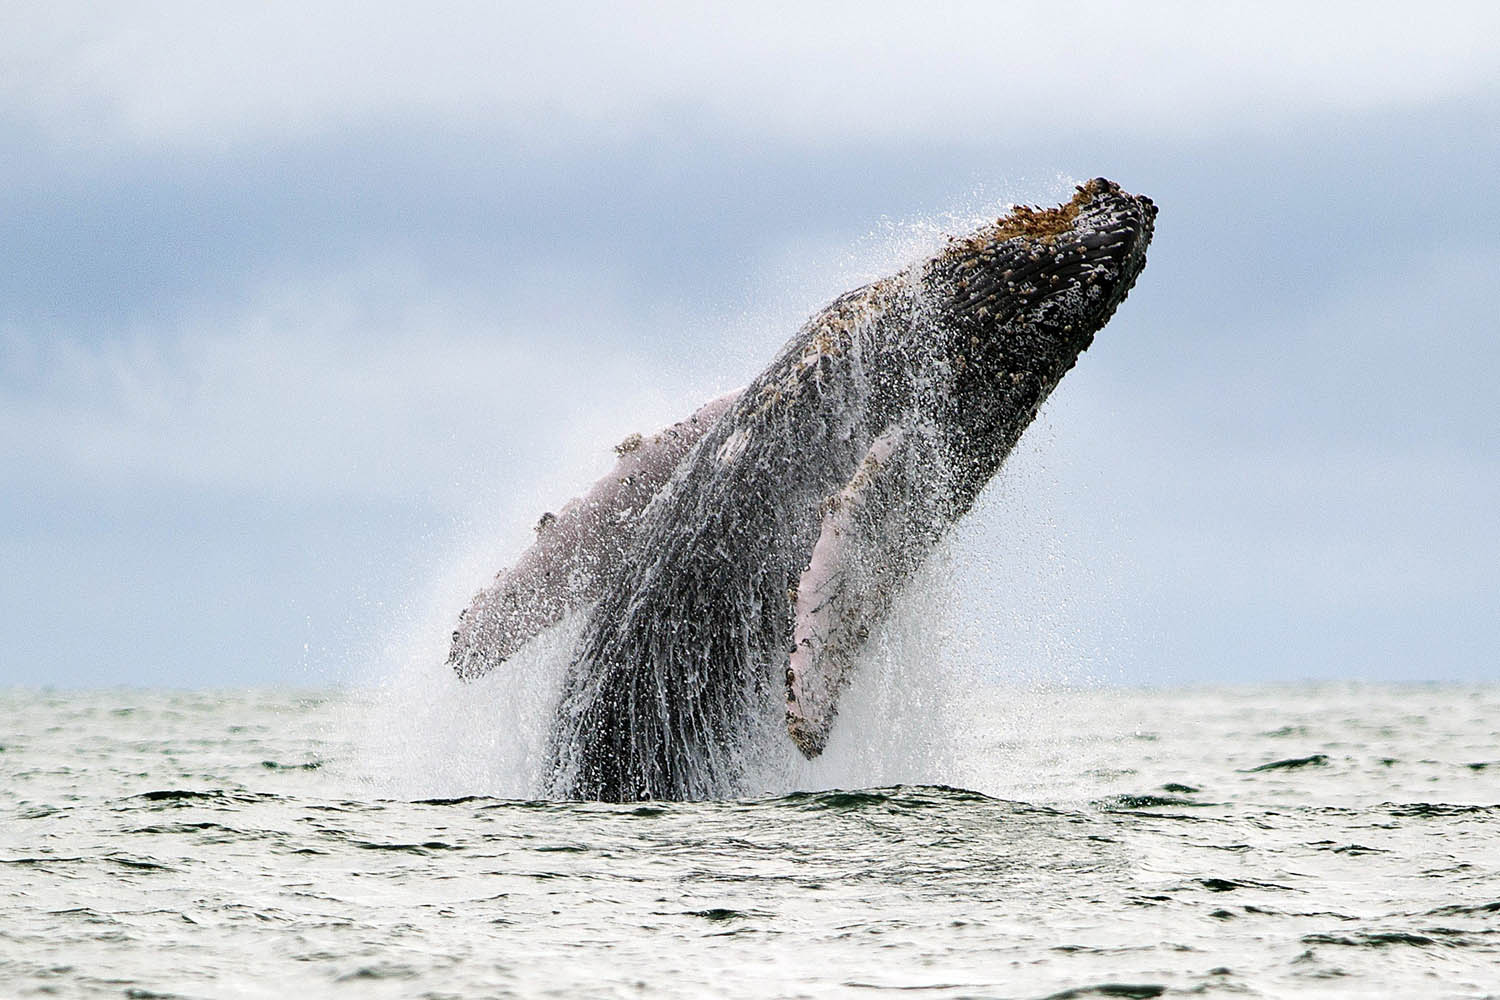 July 16, 2013. A Humpback whale jumps to the surface of the Pacific Ocean at the Uramba Bahia Malaga natural park in Colombia.